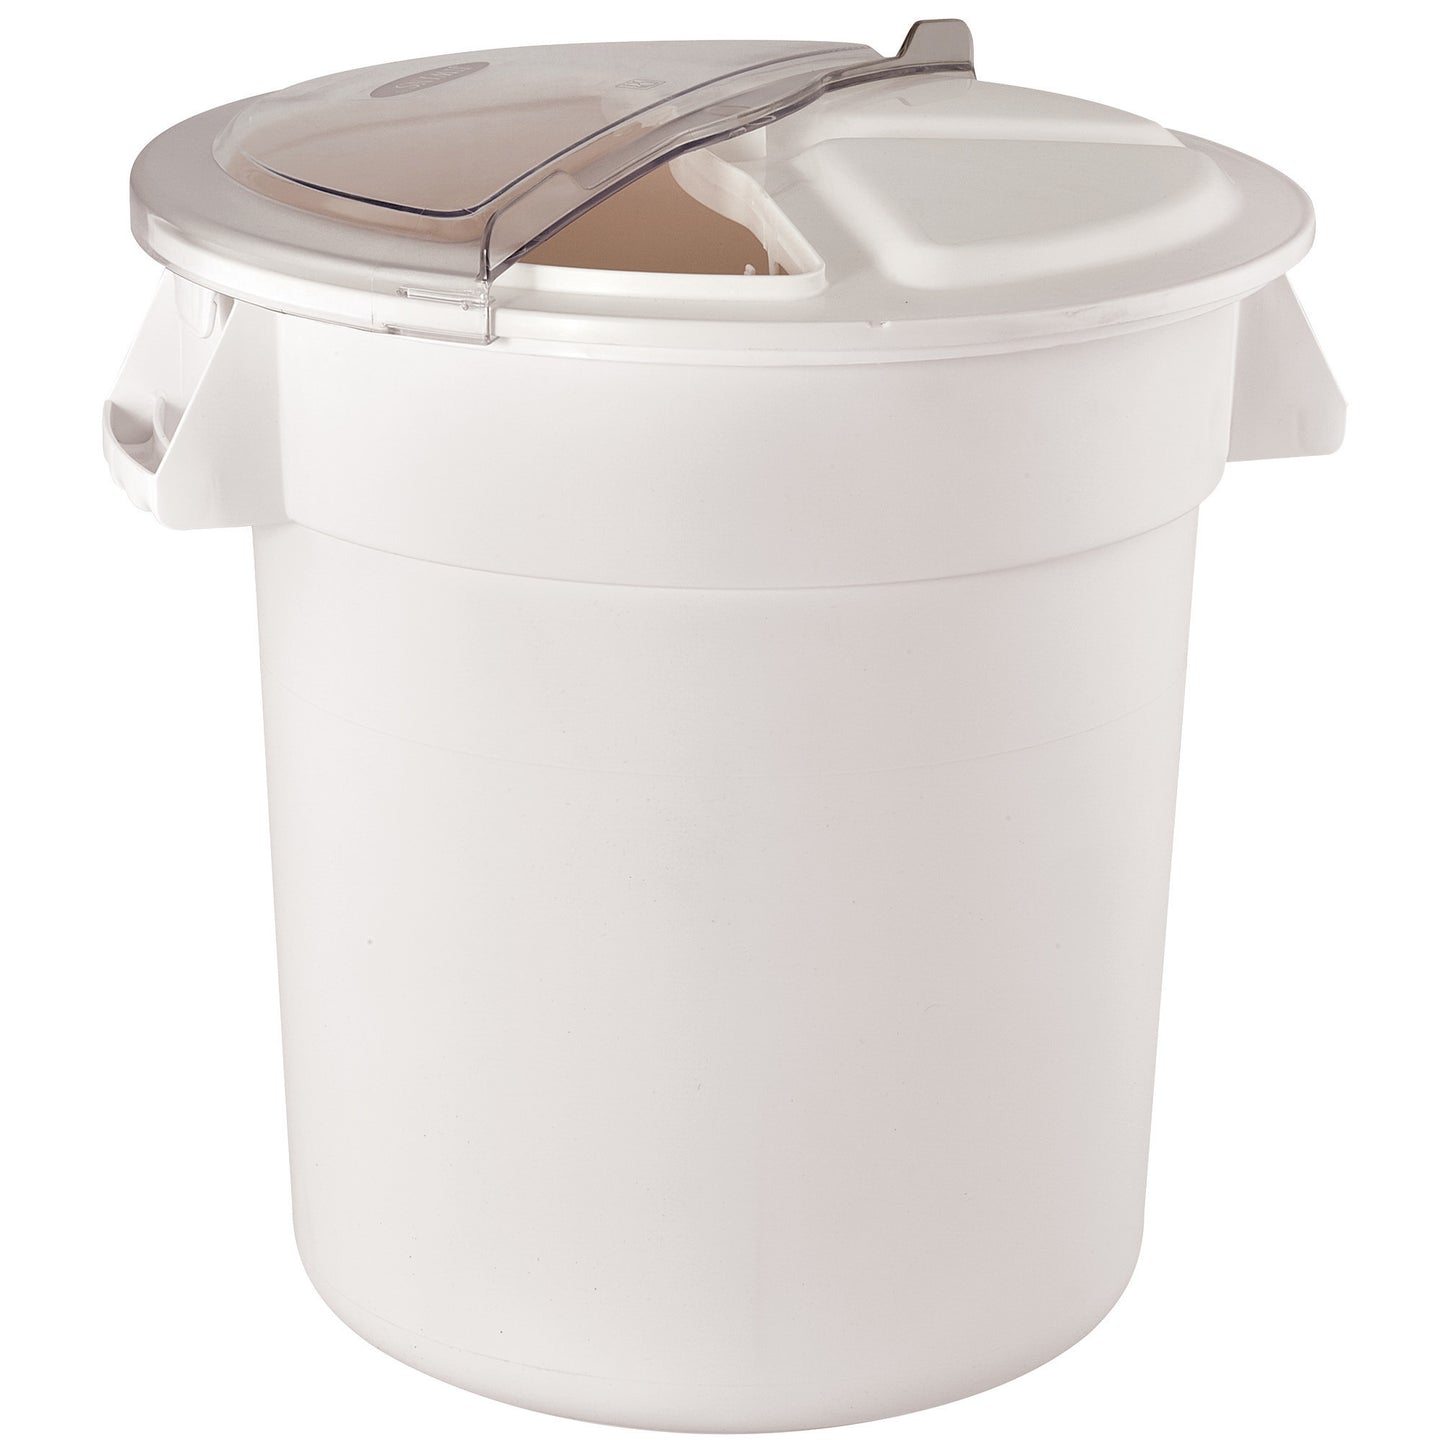 FCW-32RC - Polycarbonate Rotating Lids for White Containers - 32 Gallon